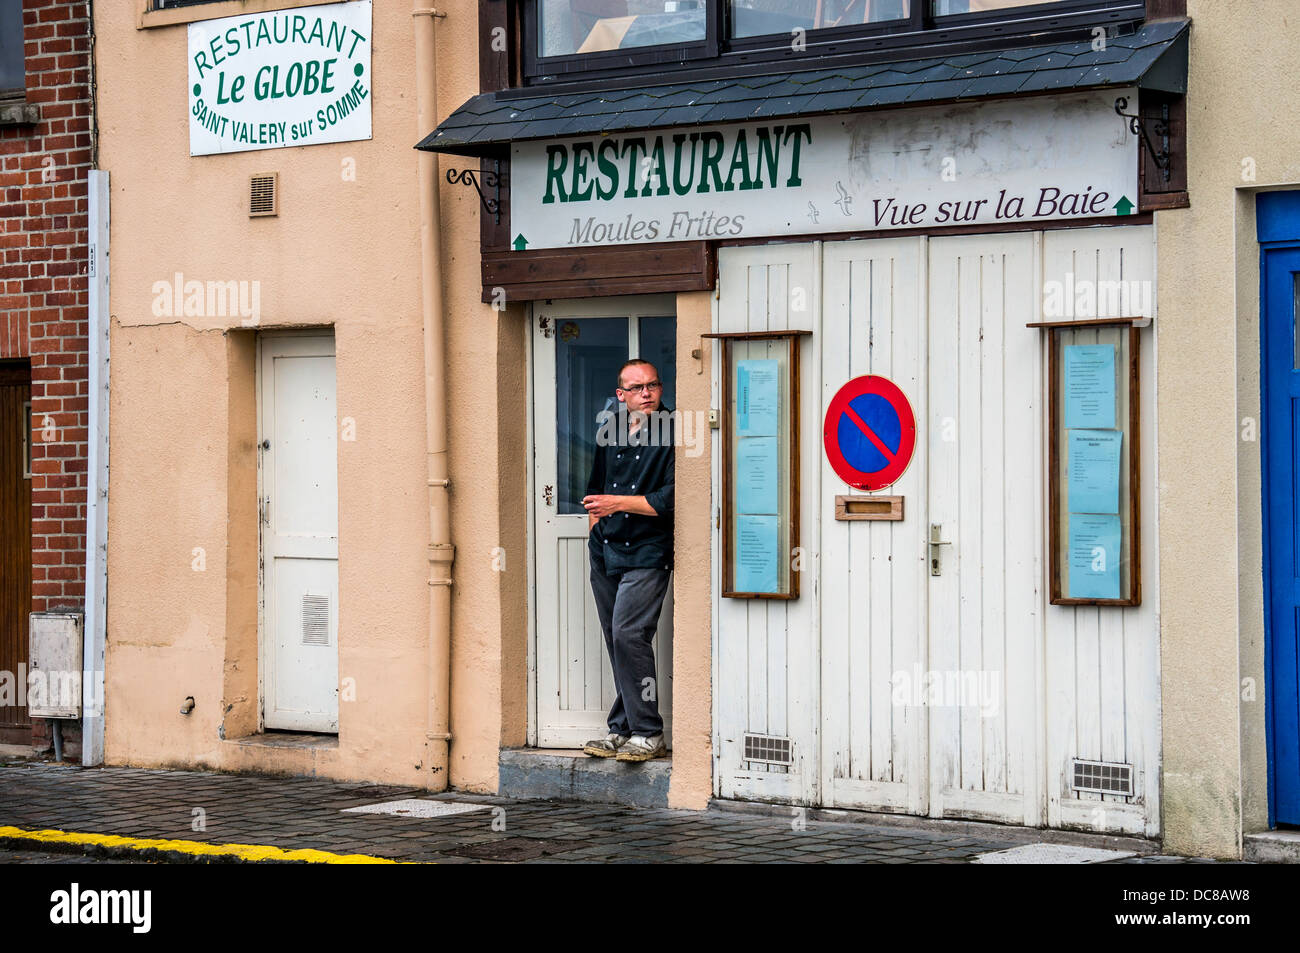 Man Smoking Outside His Restaurant In Saint Valery Sur Somme A